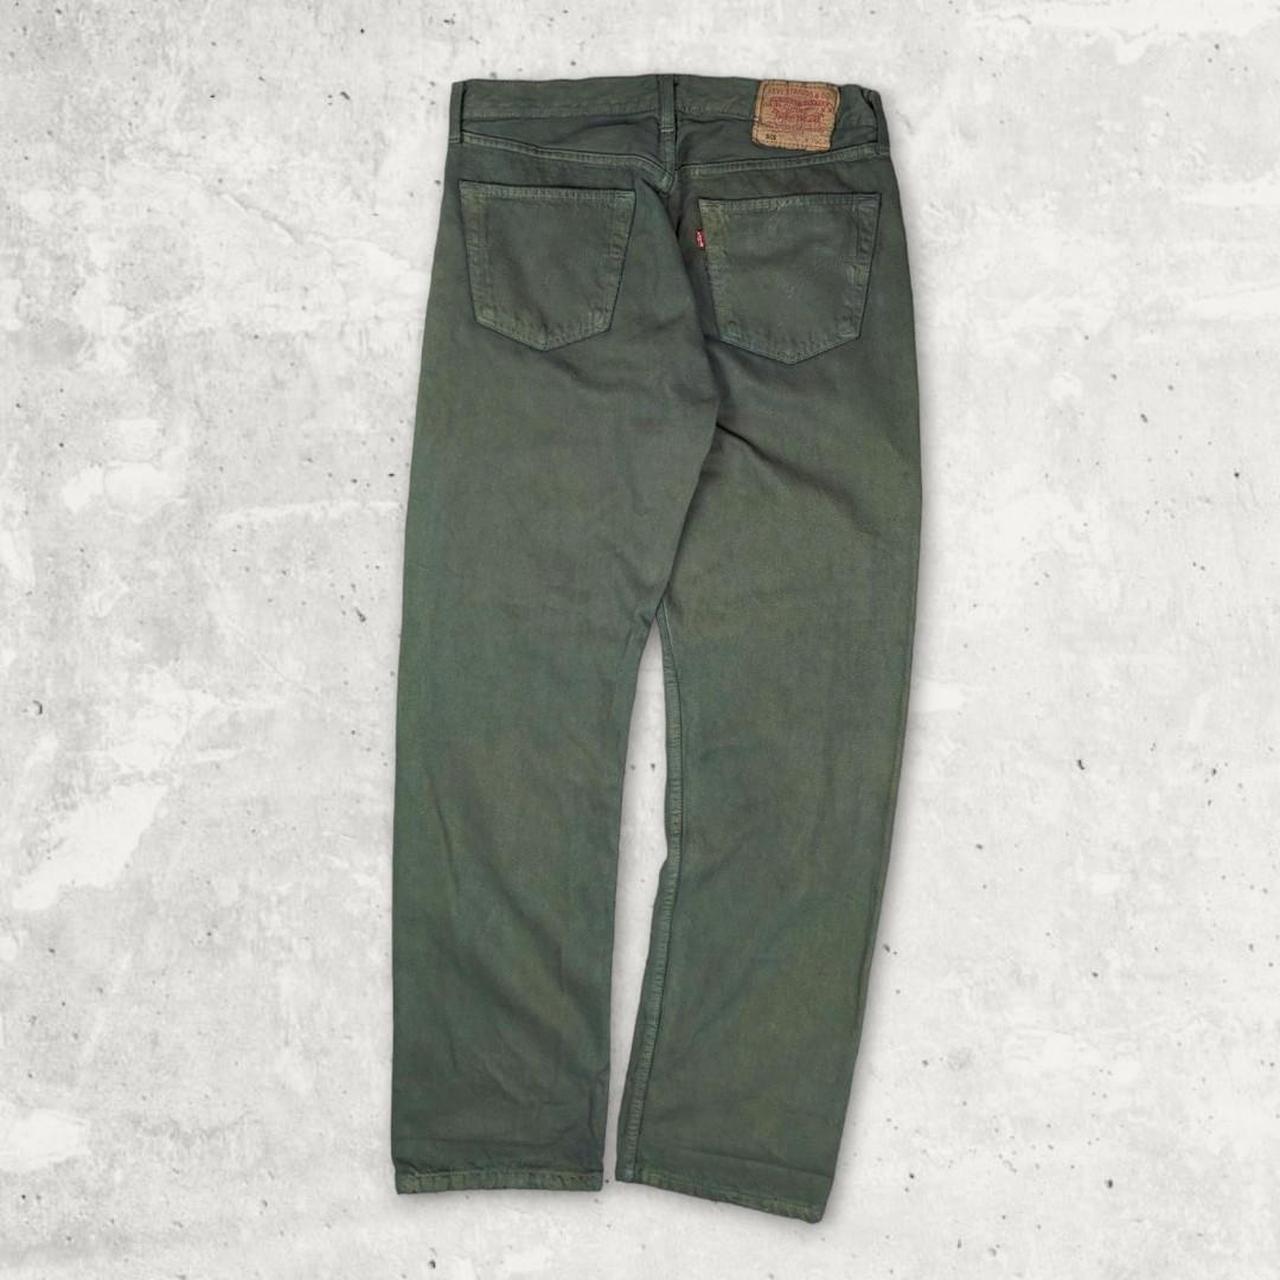 Green Jeans Baggy Vintage, Olive Green Jeans Womens